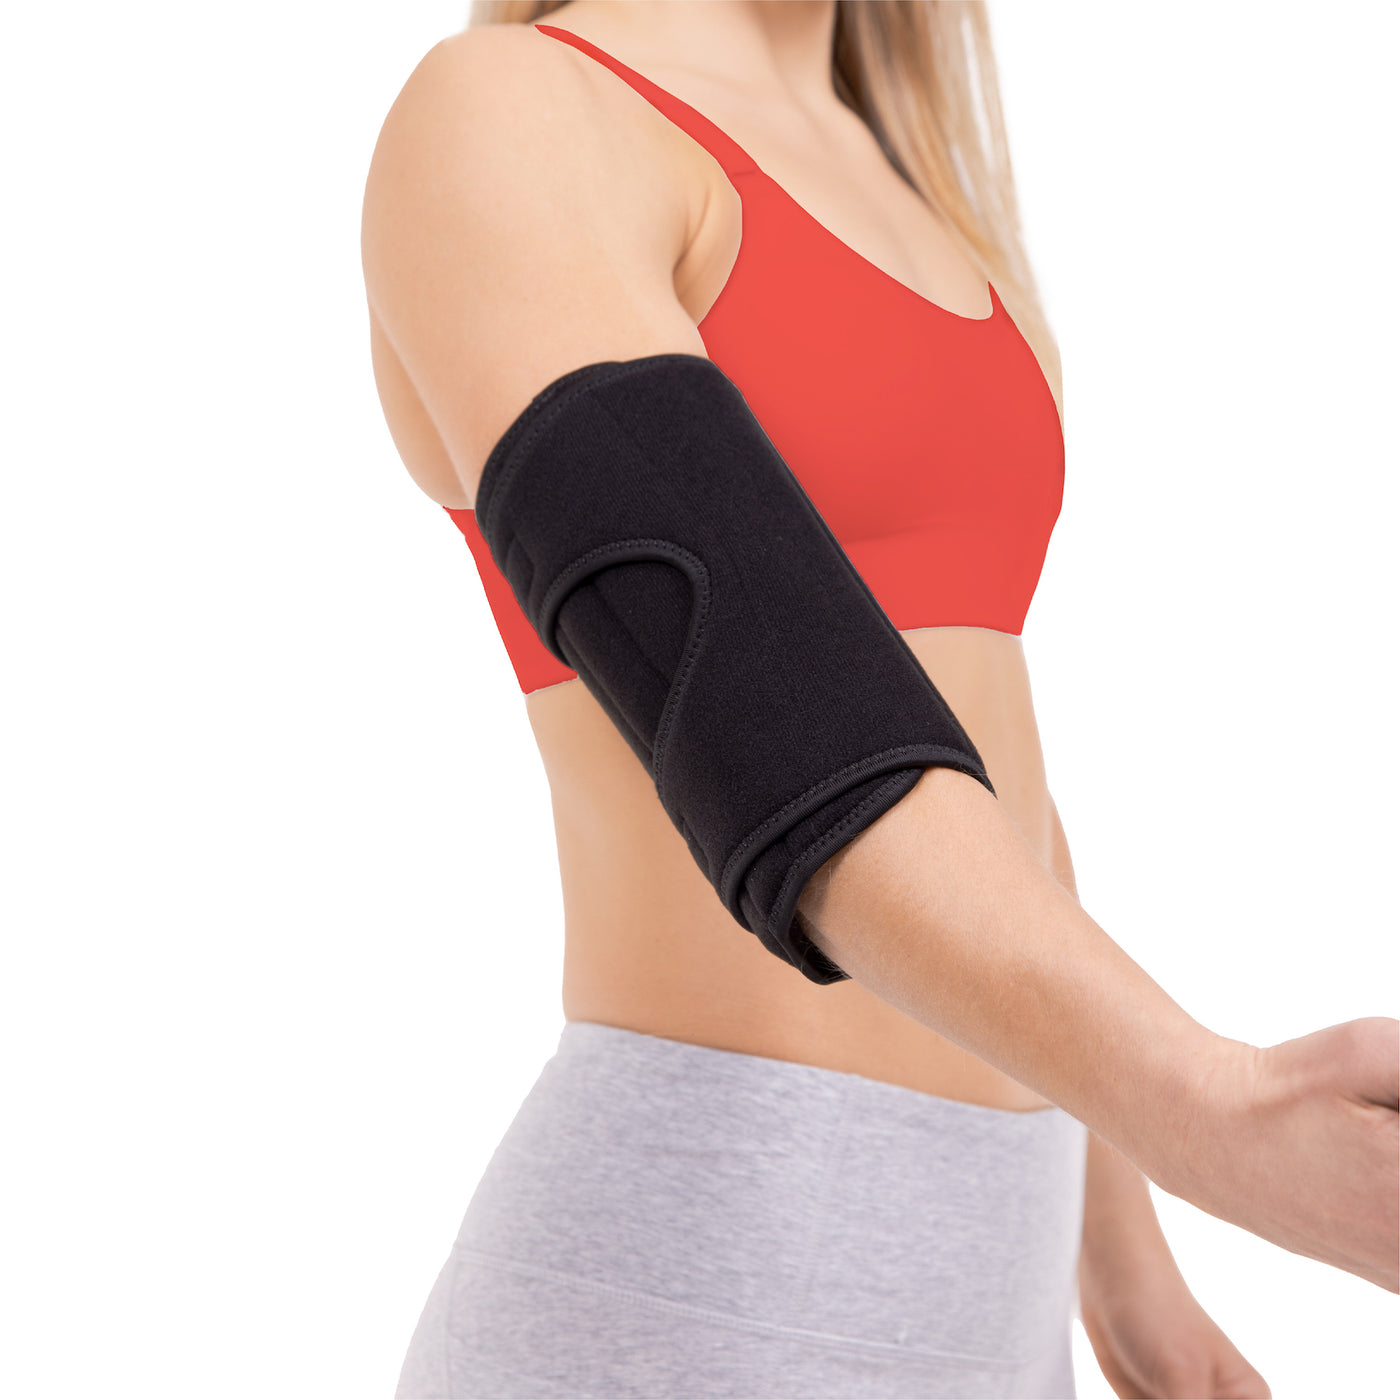 The cubital tunnel brace is a soft elbow immobilizer sleeping splint for ulnar nerve pain